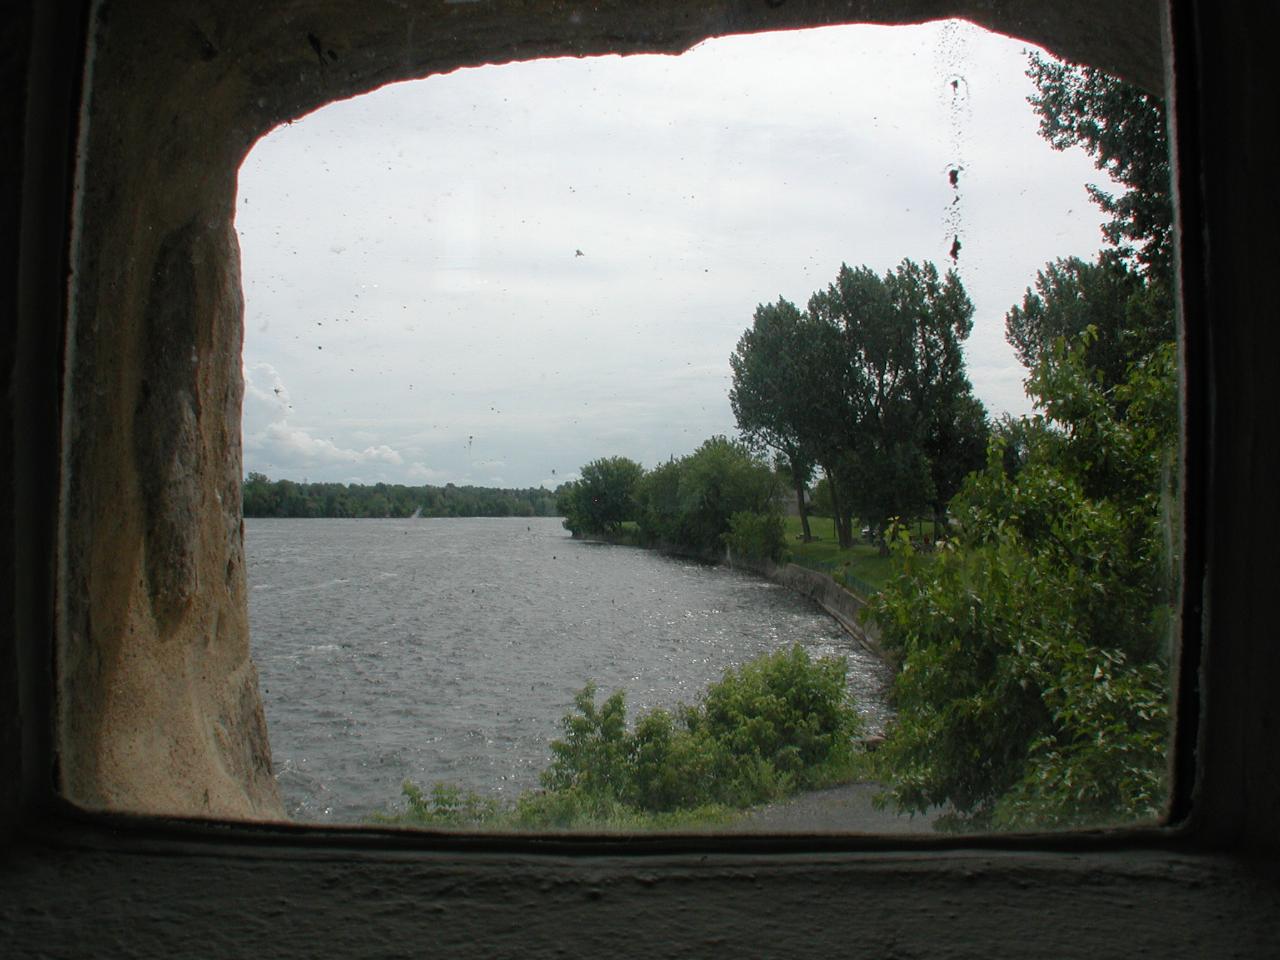 Another, more expansive view, of the river approaching the Fort